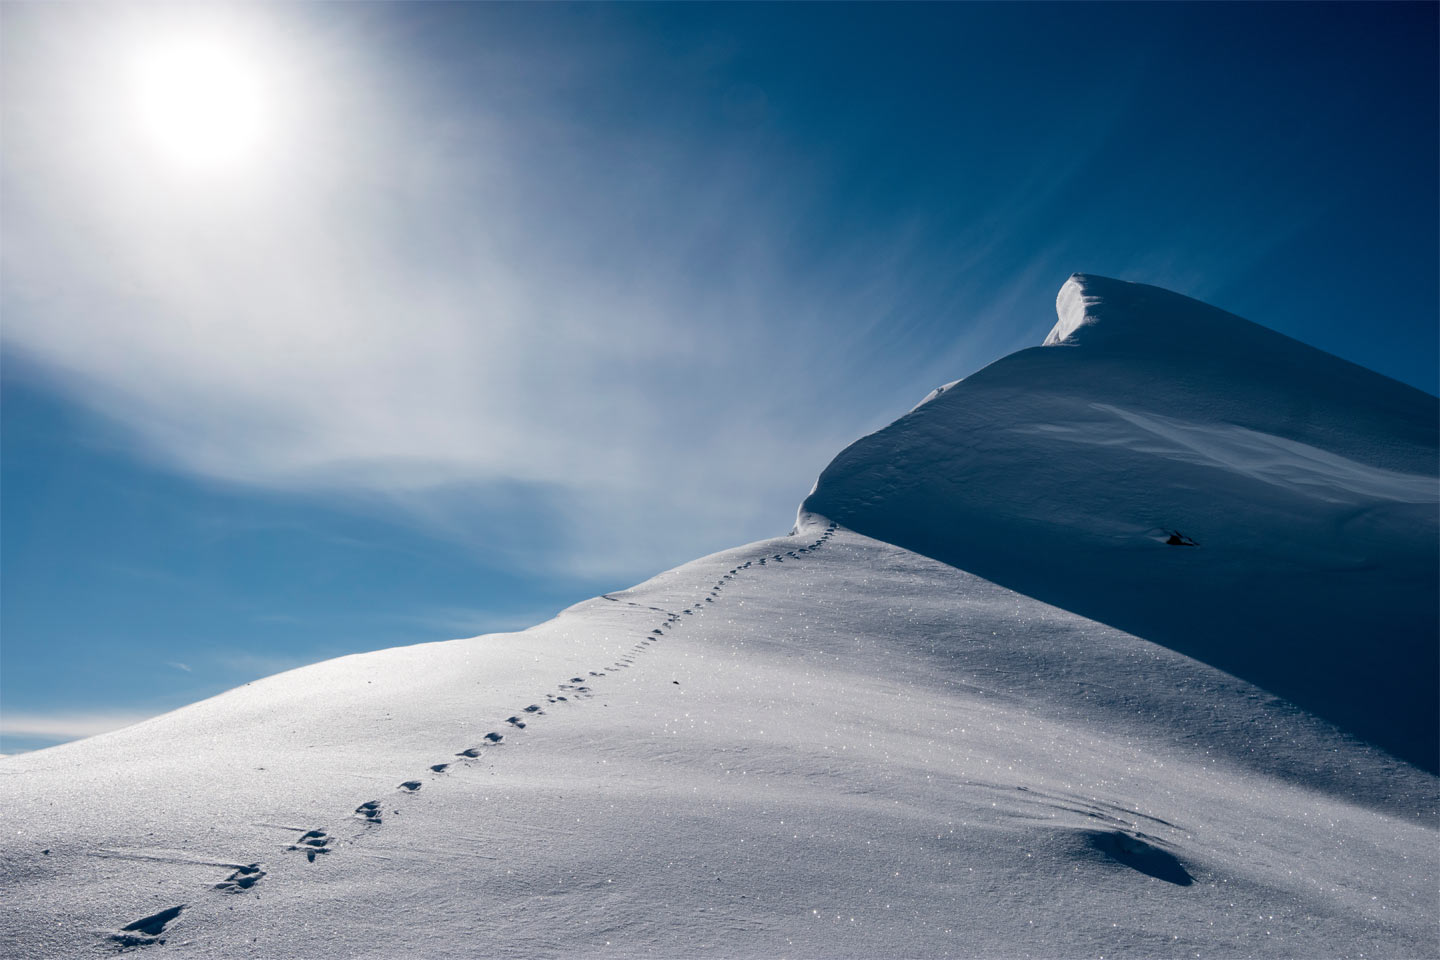 Footsteps in the snow to start your winter semester at EHL